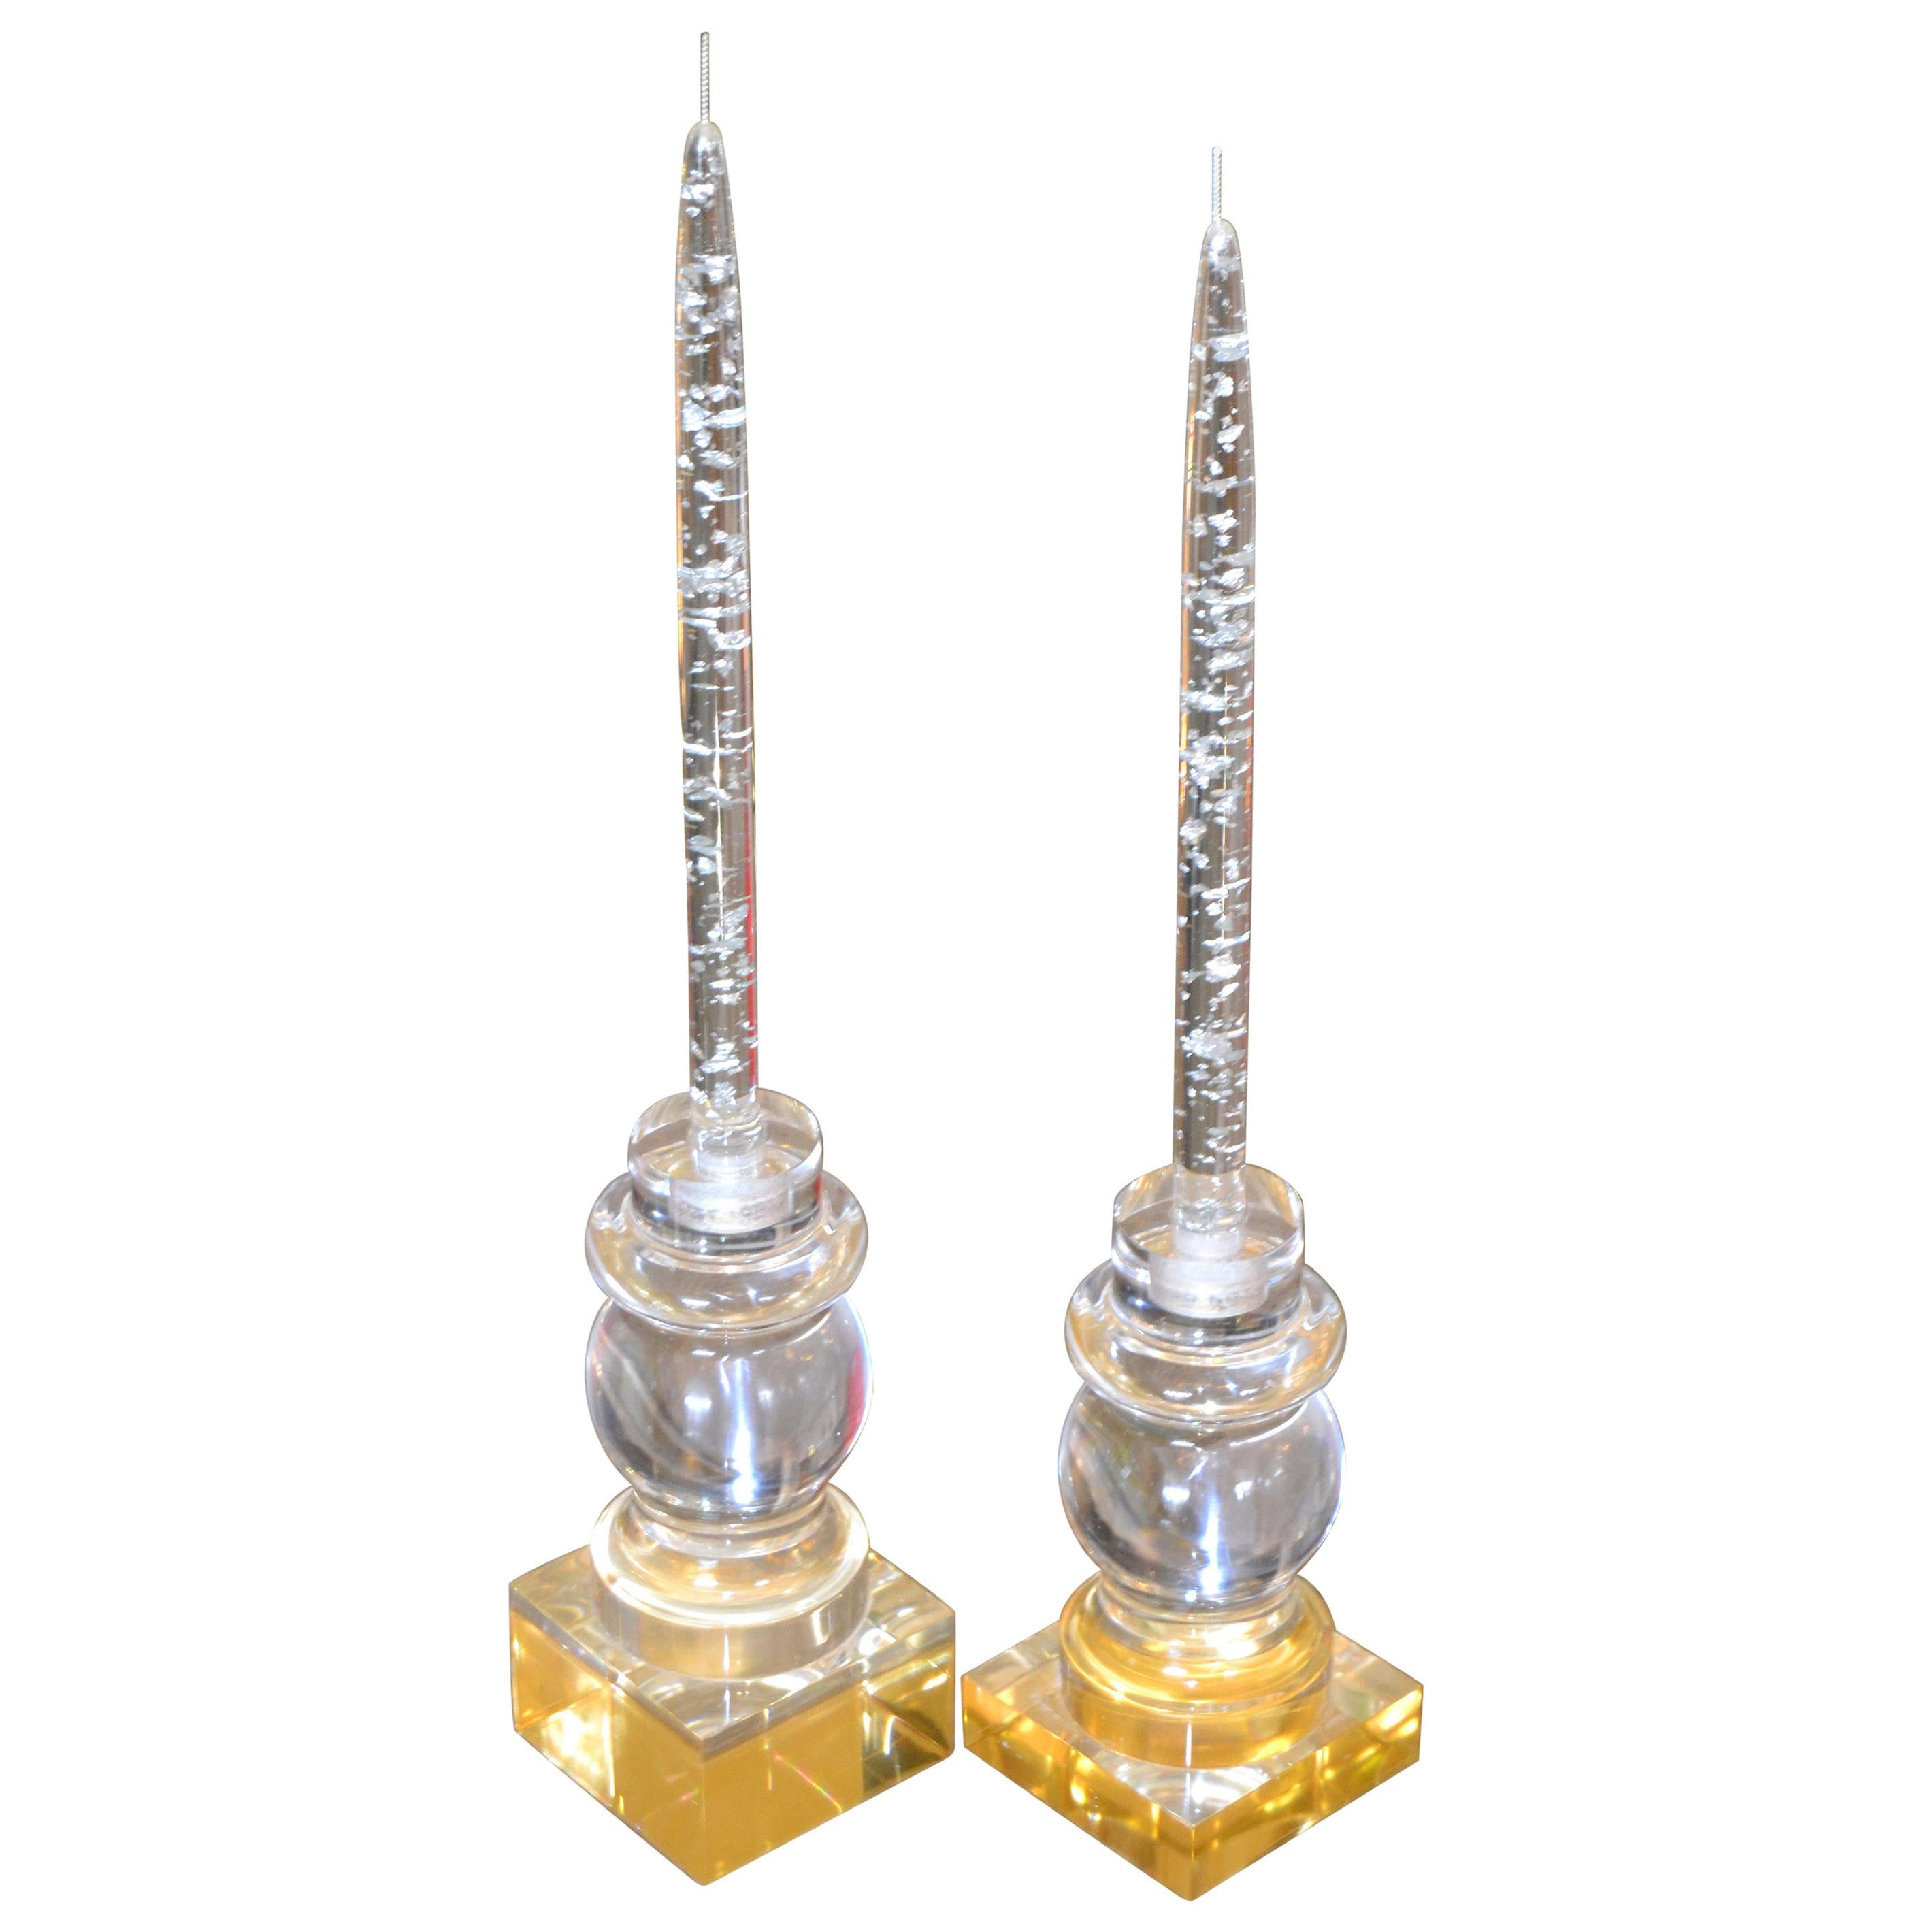 Modern Clear and Gold Turned Acrylic Candleholders, Candlesticks, Pair